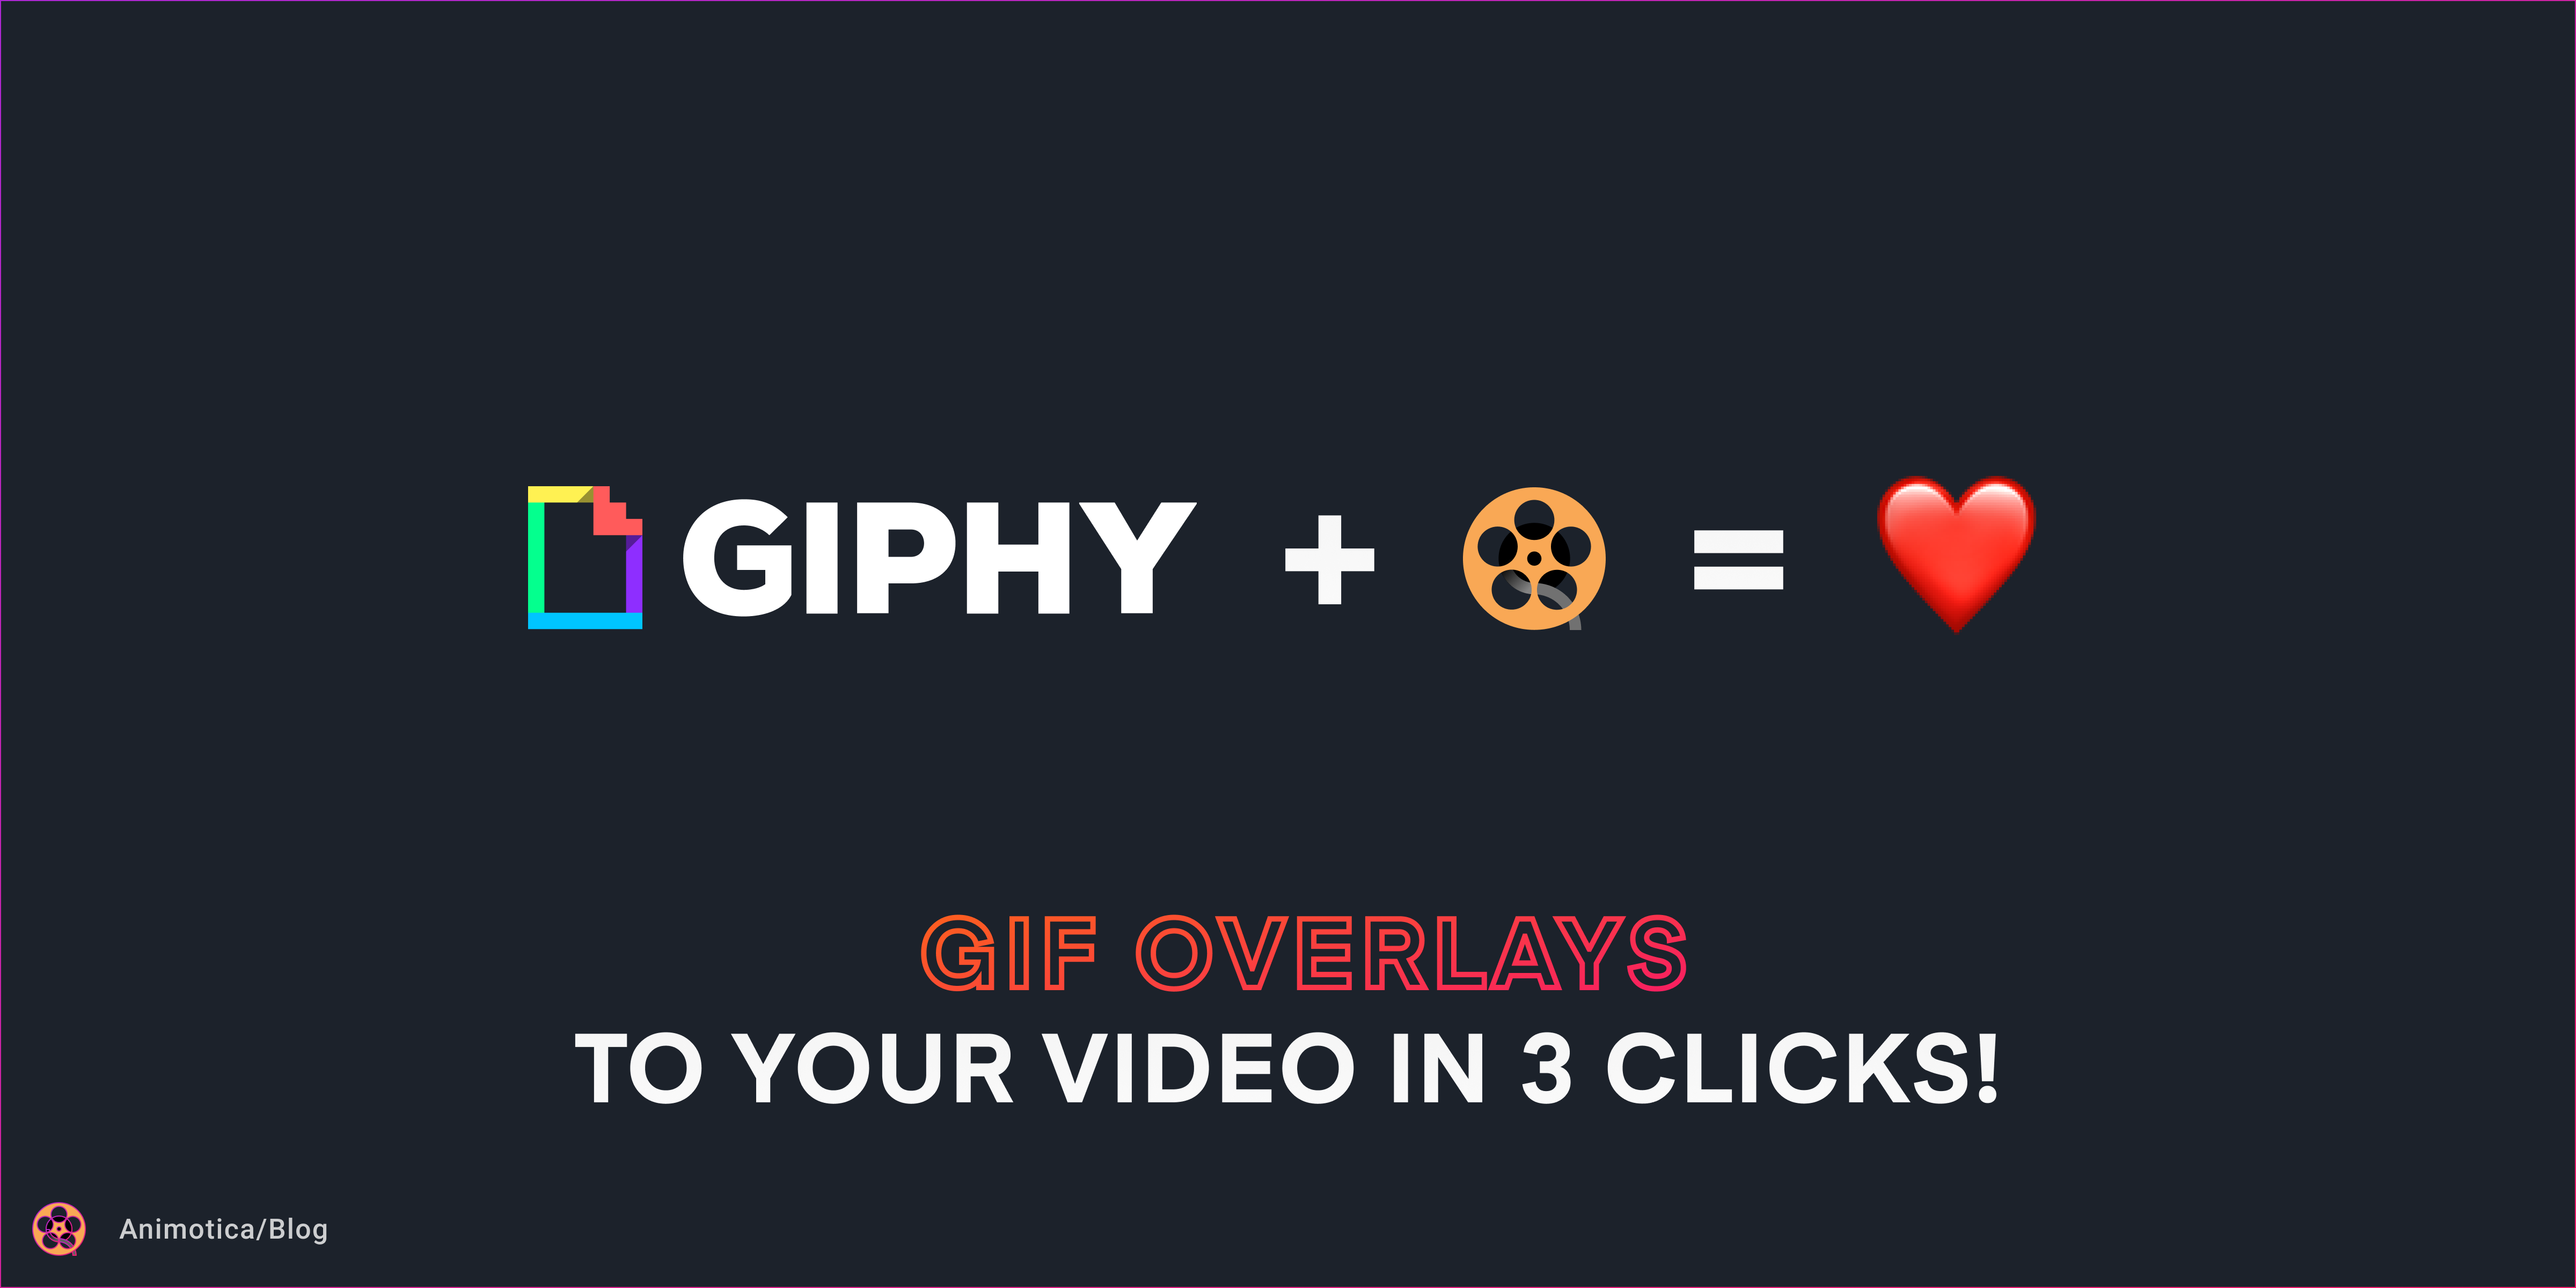 Turn Any  Video Into A GIF By Just Adding GIF To The URL, TechCrunch